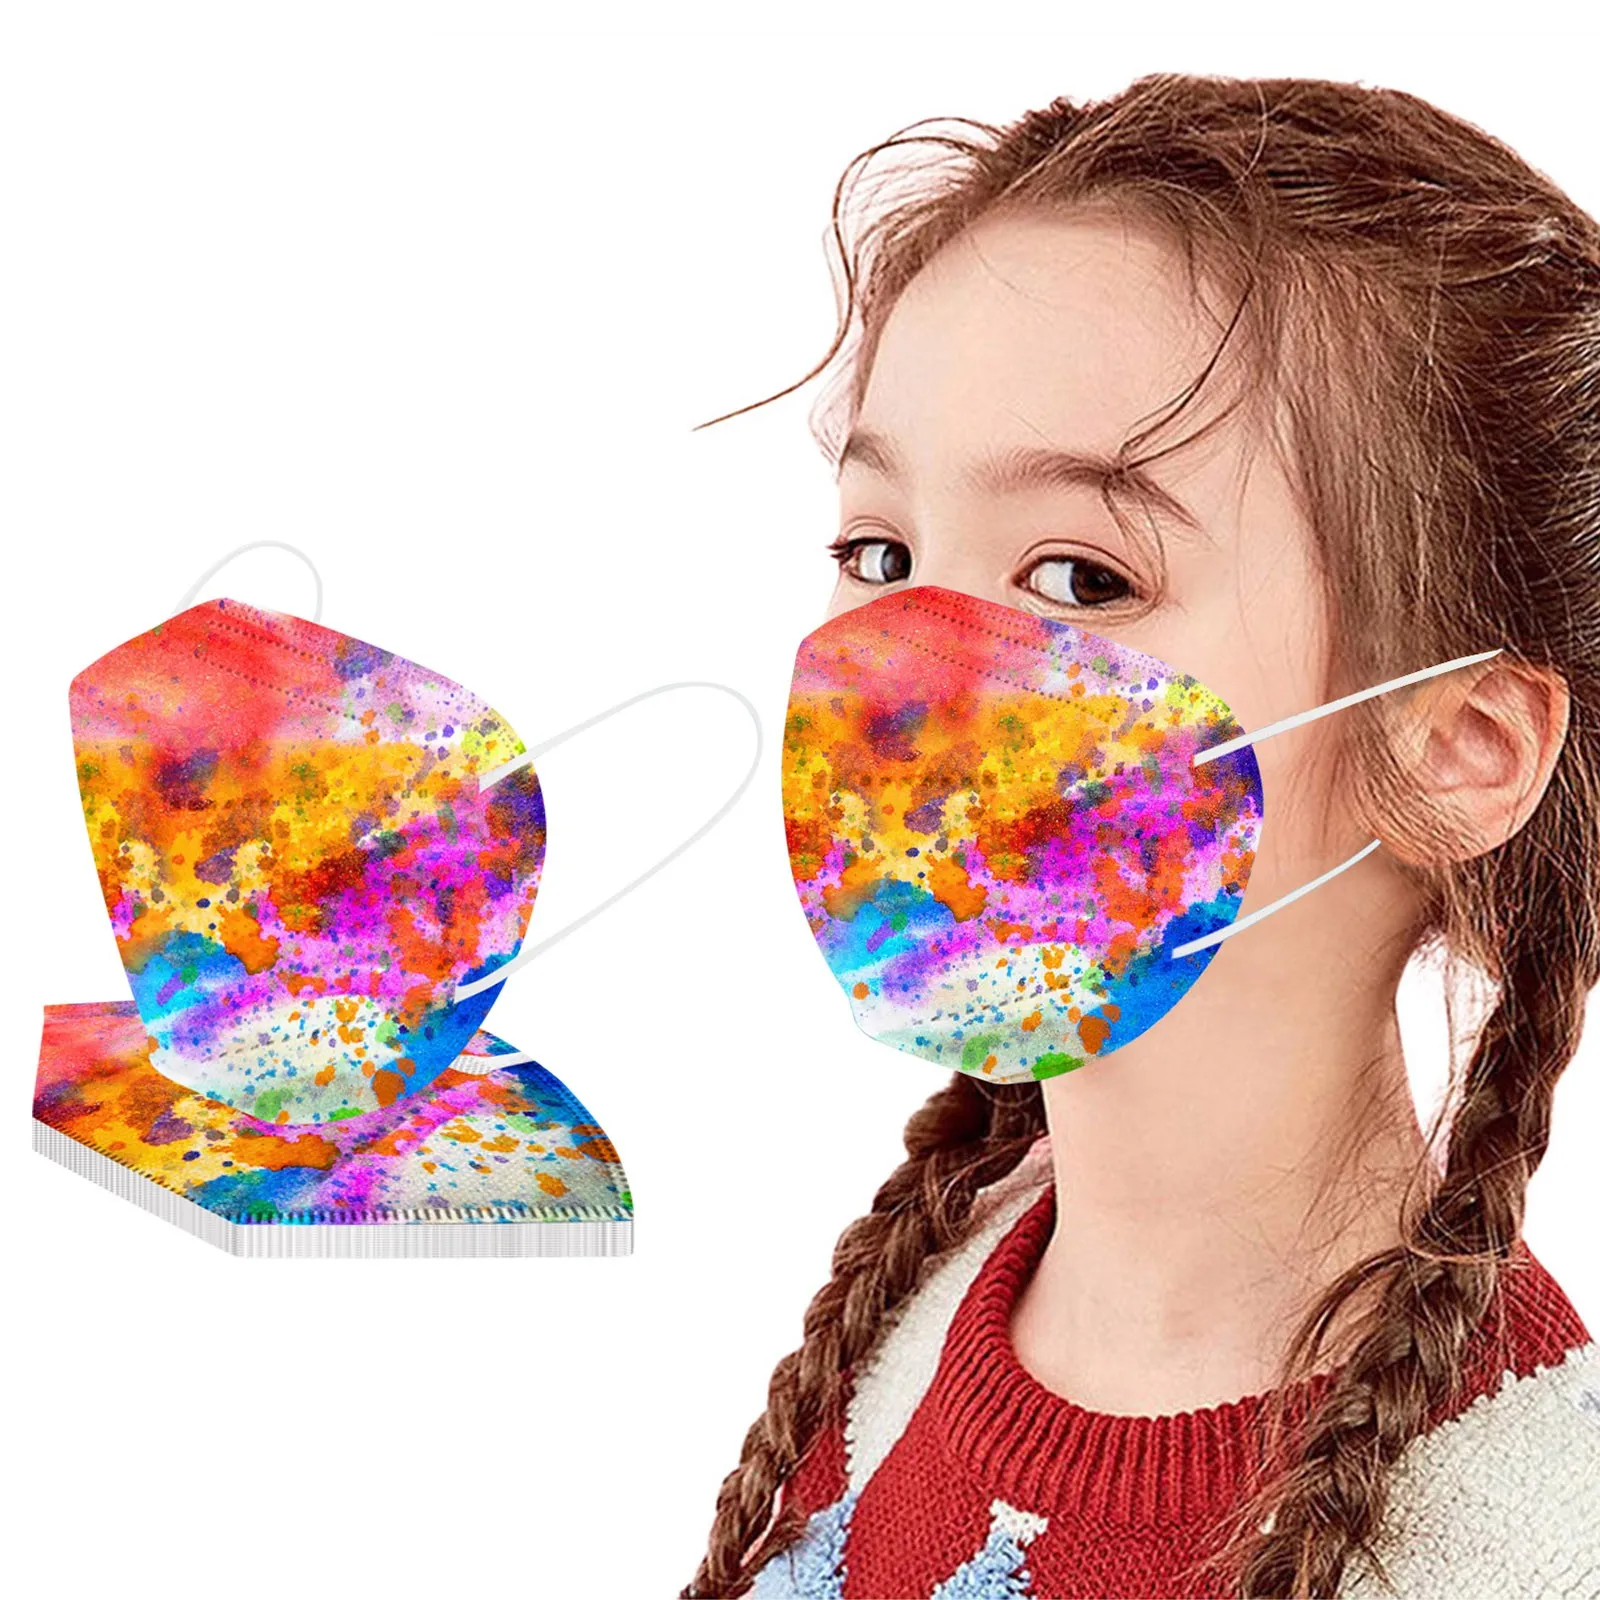 10PC Children's Mask Tie Dye Printing Mask Disposable Mask Industrial 5Ply Earloop Personal Face Mask Mascarillas Halloween cute halloween costumes Cosplay Costumes